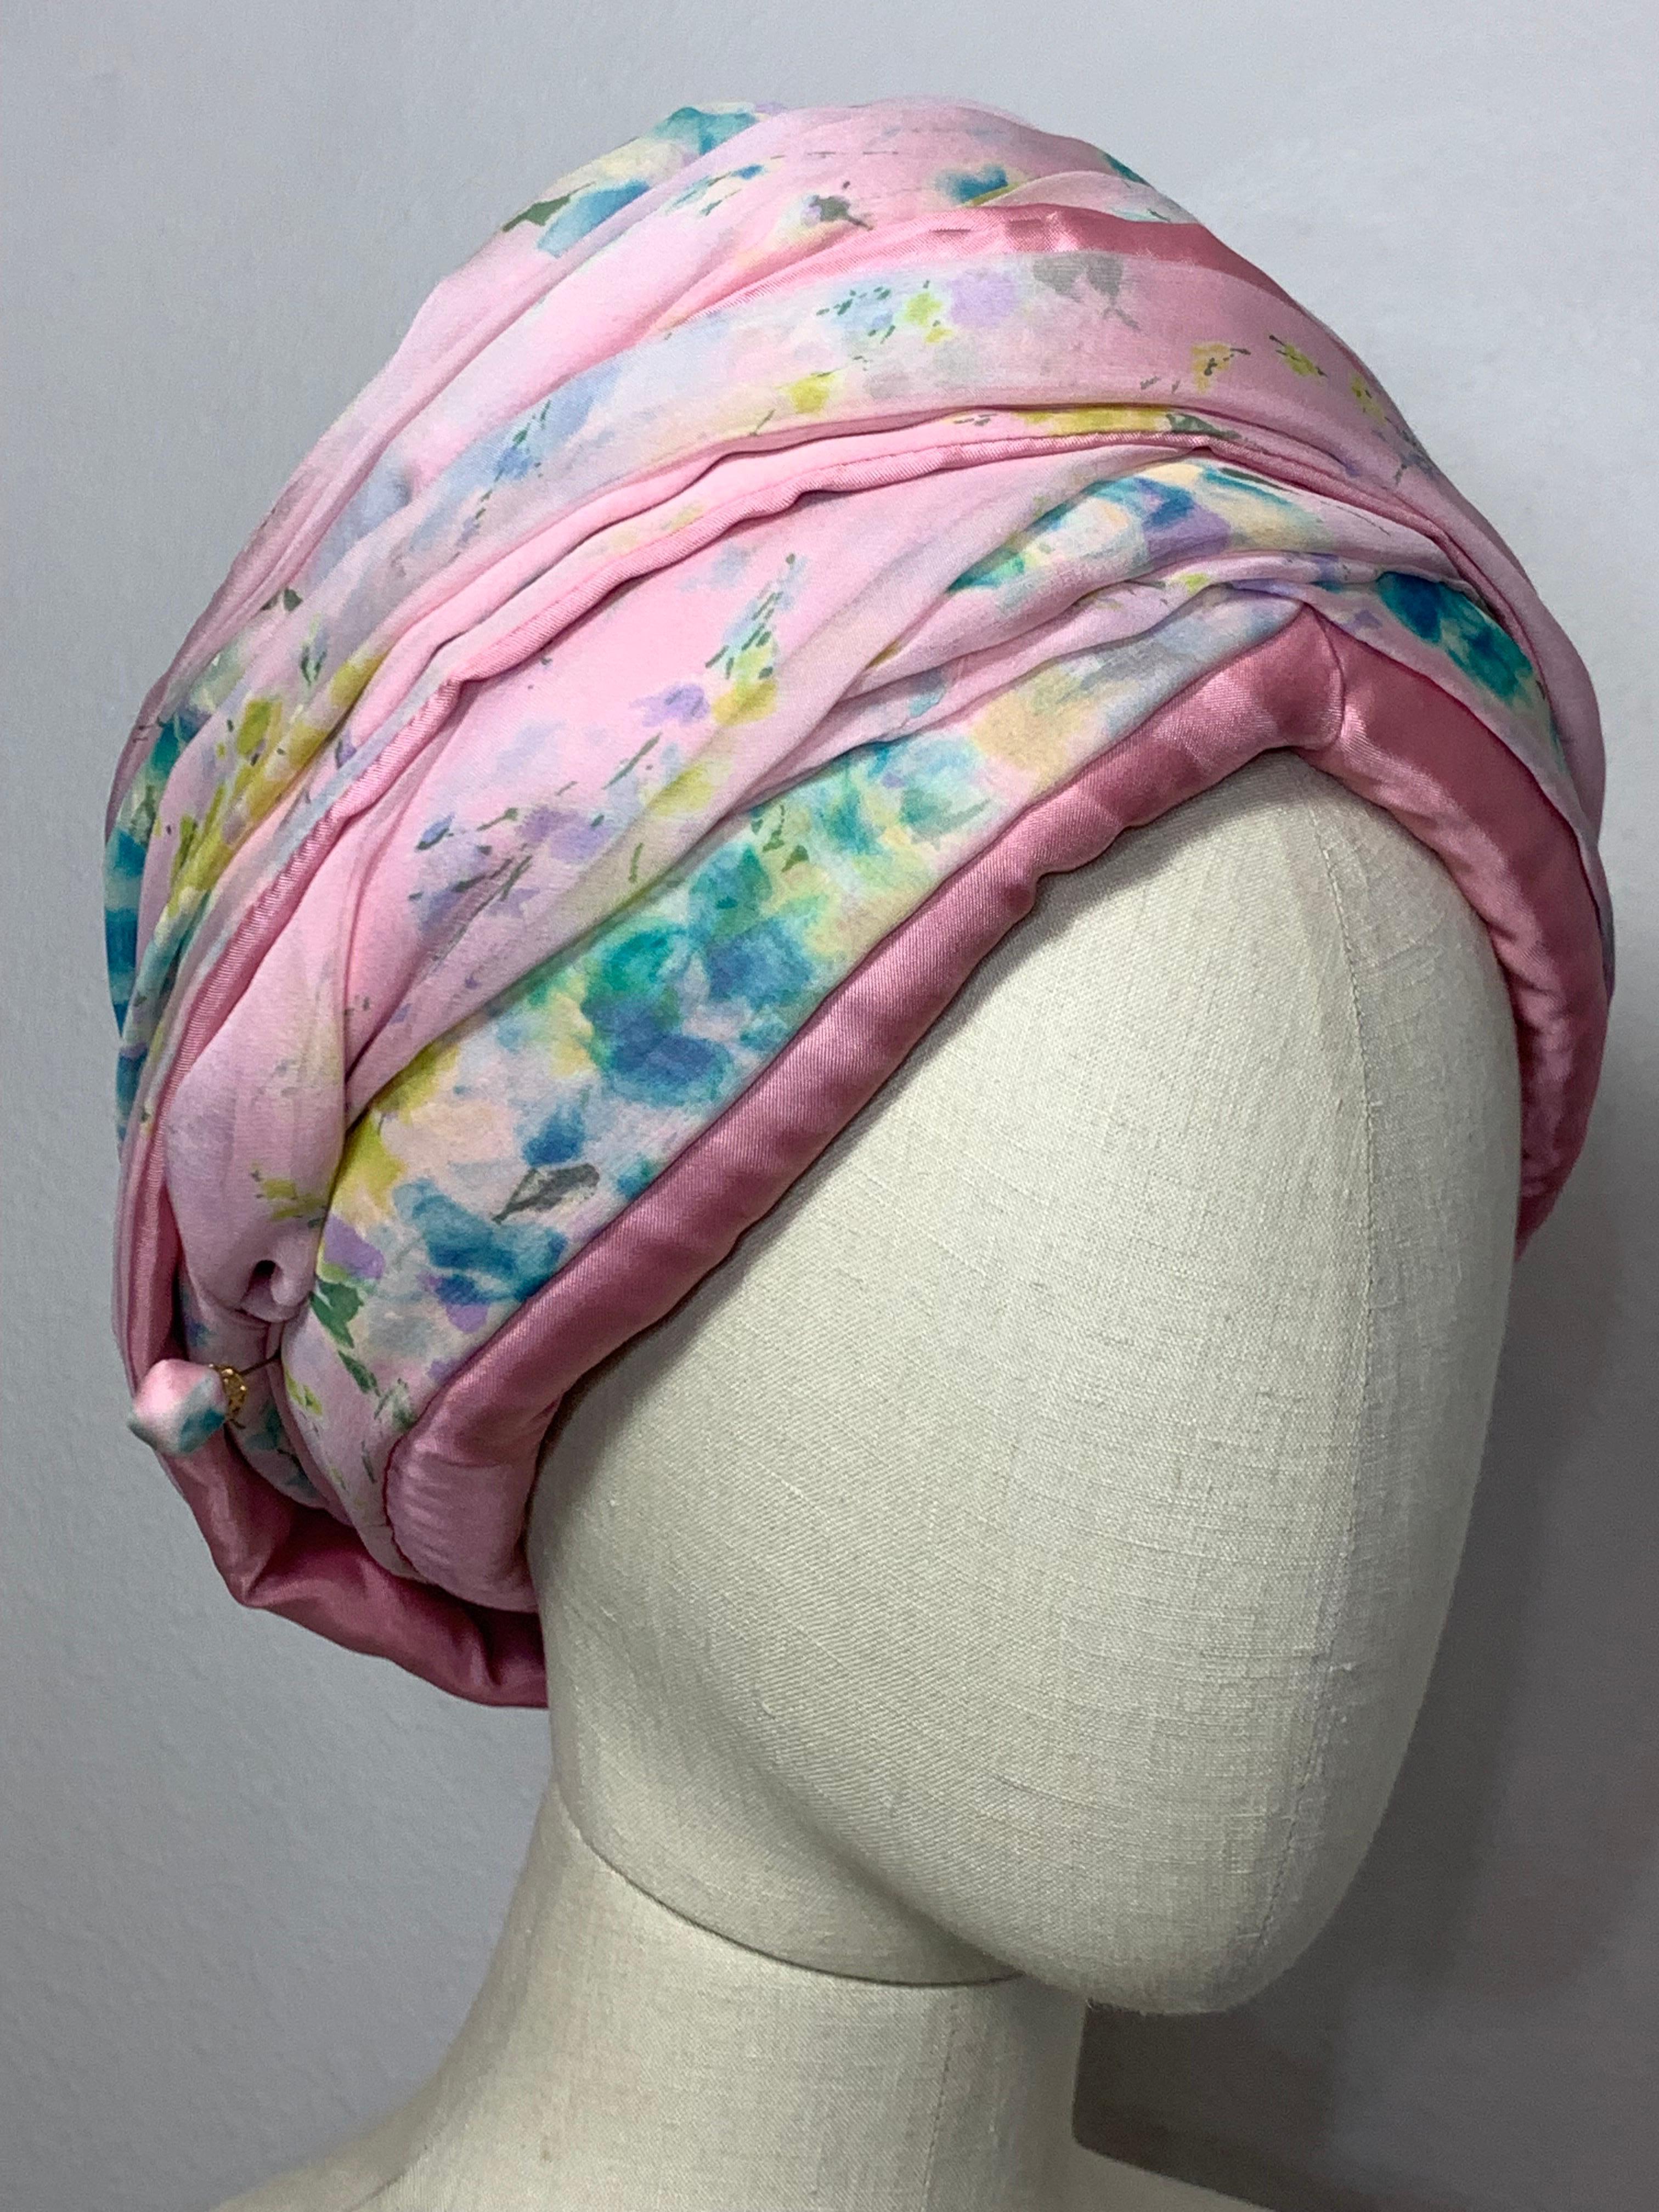 Custom Made Spring/Summer Pastel Pink Chiffon Turban w Delicate Floral Print: A very traditional shape turban, simple and spare with elaborate wrapped pattern but no extra embellishment. A soft watercolor floral design. Matching hatpin included.